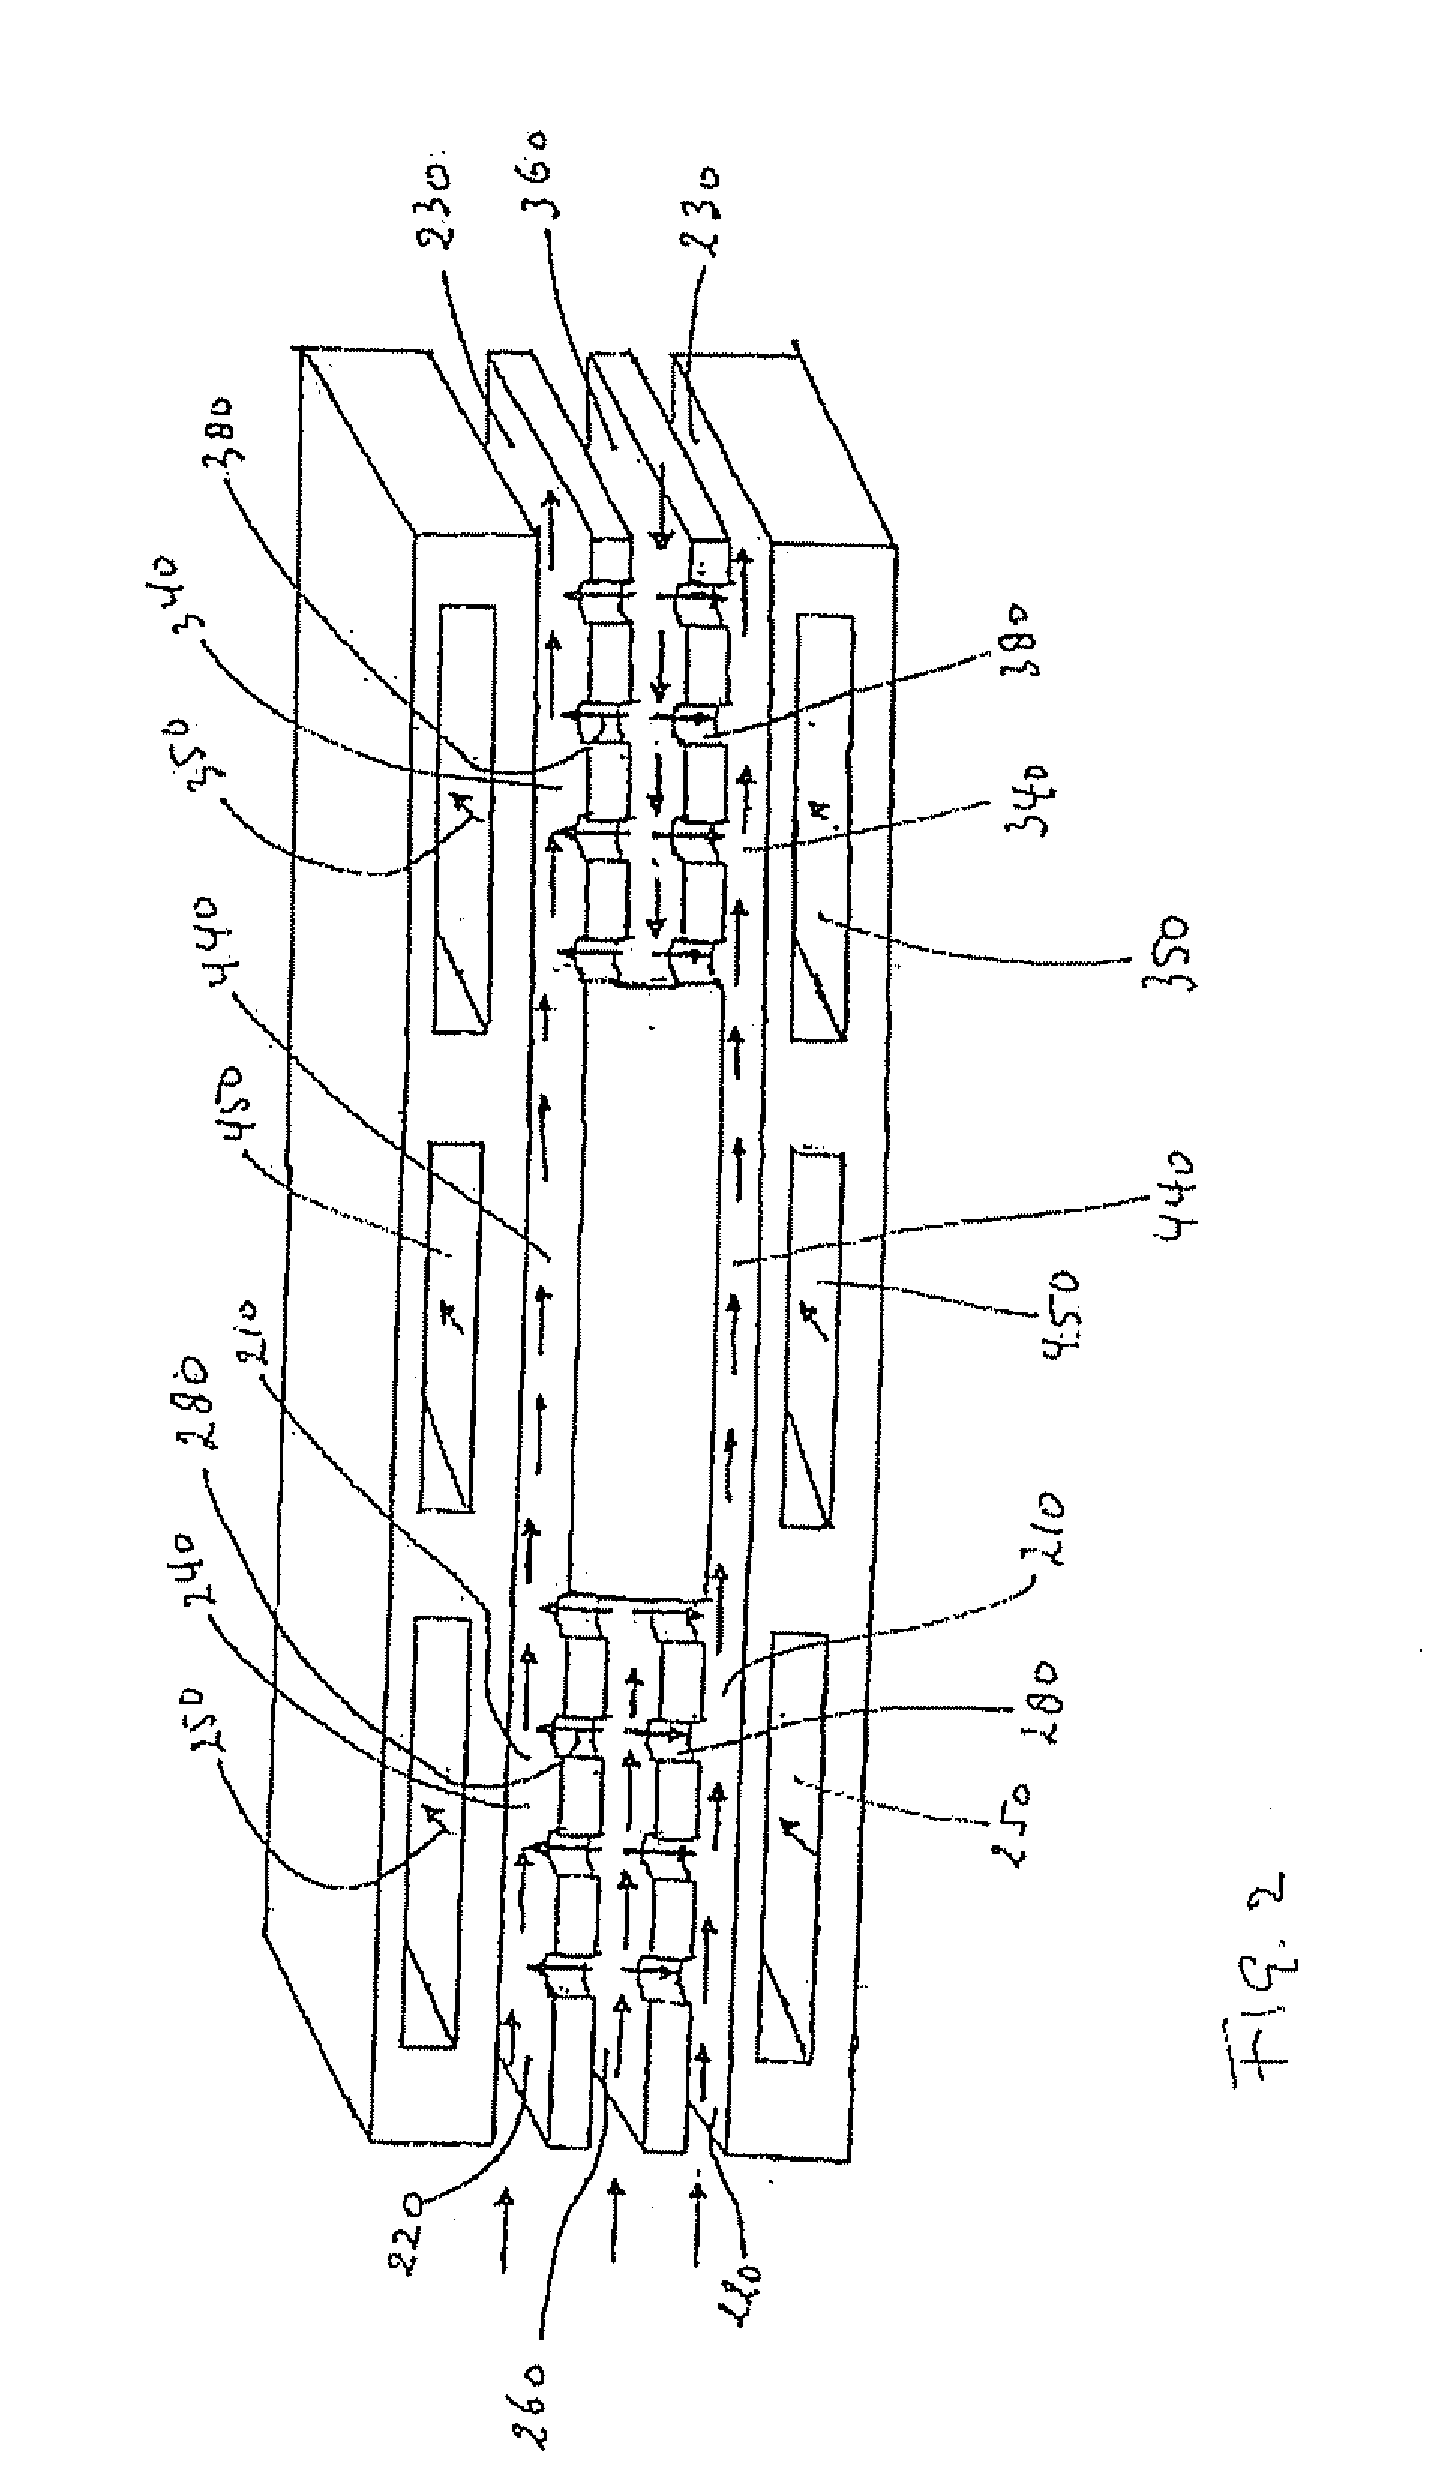 Method Of Installing An Epoxidation Catalyst In A Reactor, A Method Of Preparing An Epoxidation Catalyst, An Epoxidation Catalyst, A Process For The Preparation Of An Olefin Oxide Or A Chemical Derivable From An Olefin Oxide, And A Reactor Suitable For Such A Process